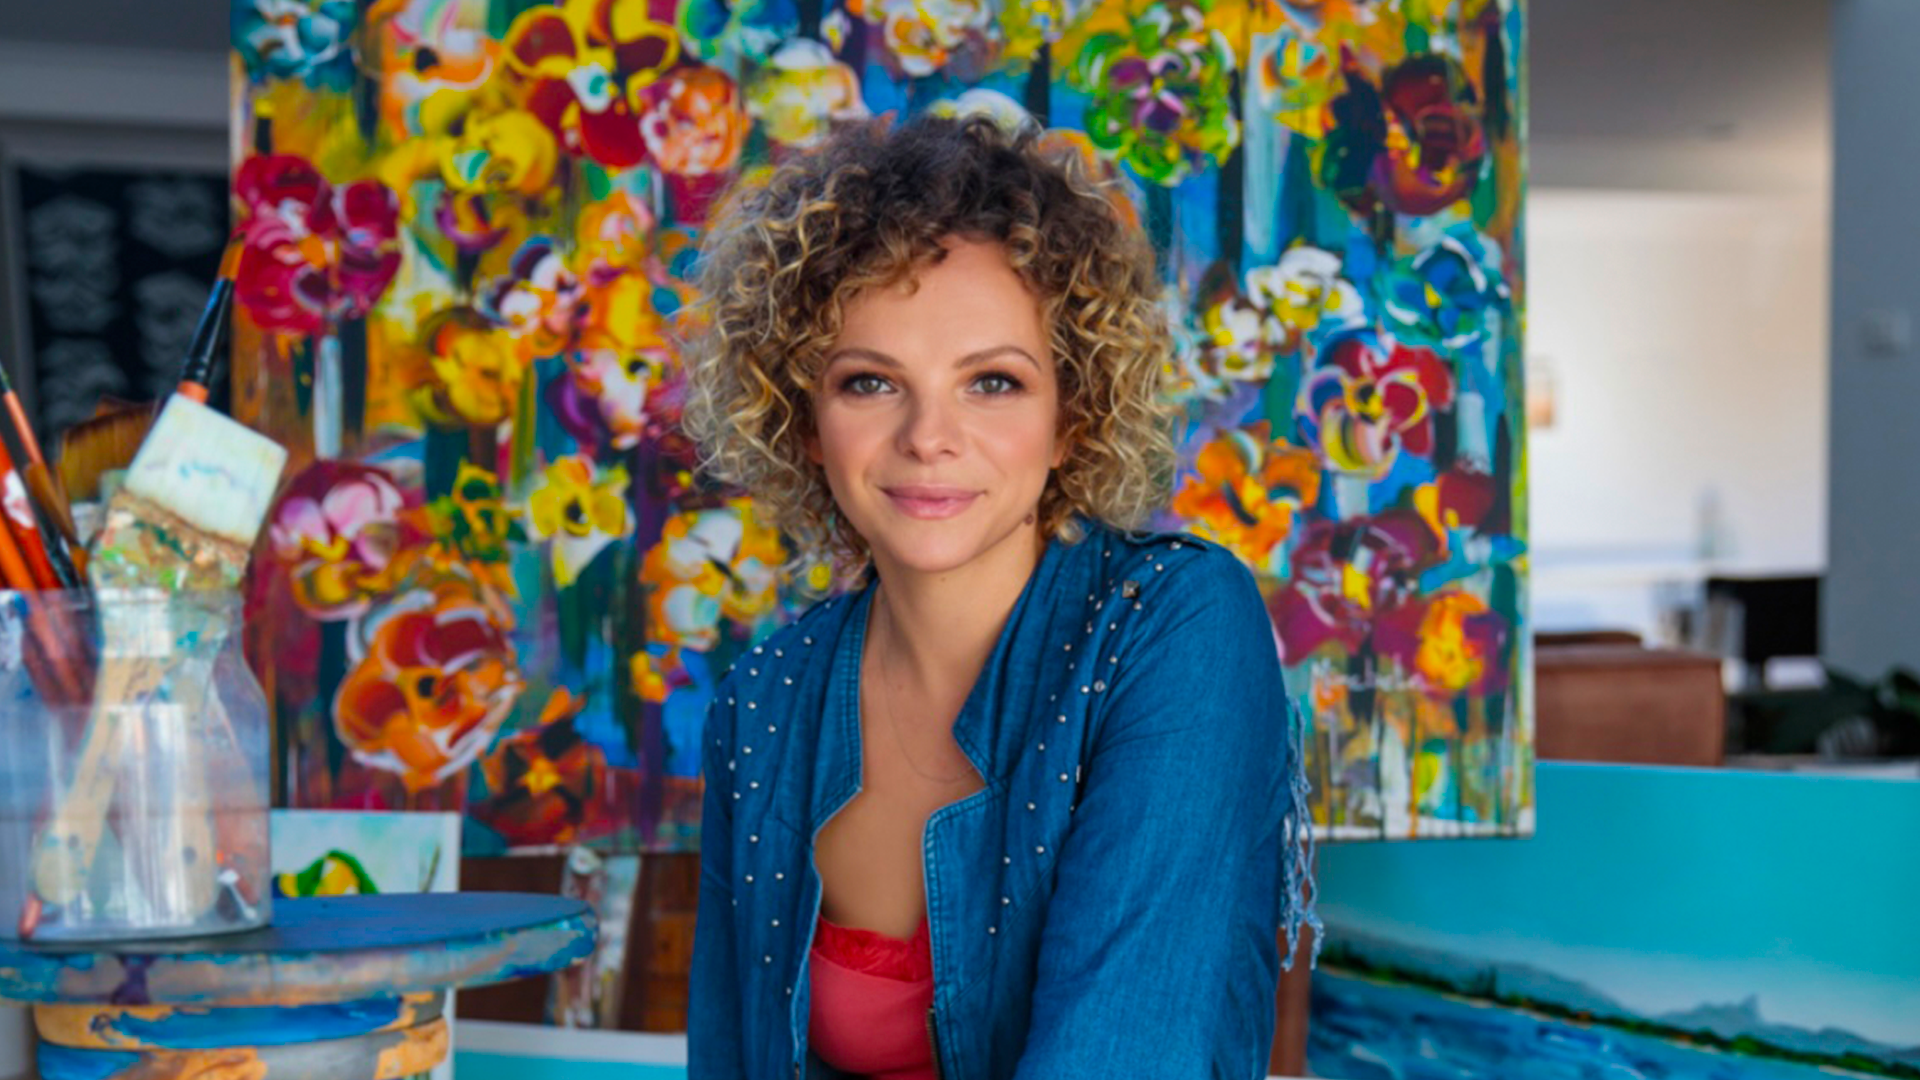 Embracing Art with Heart: The Palette of Mirabela Varga